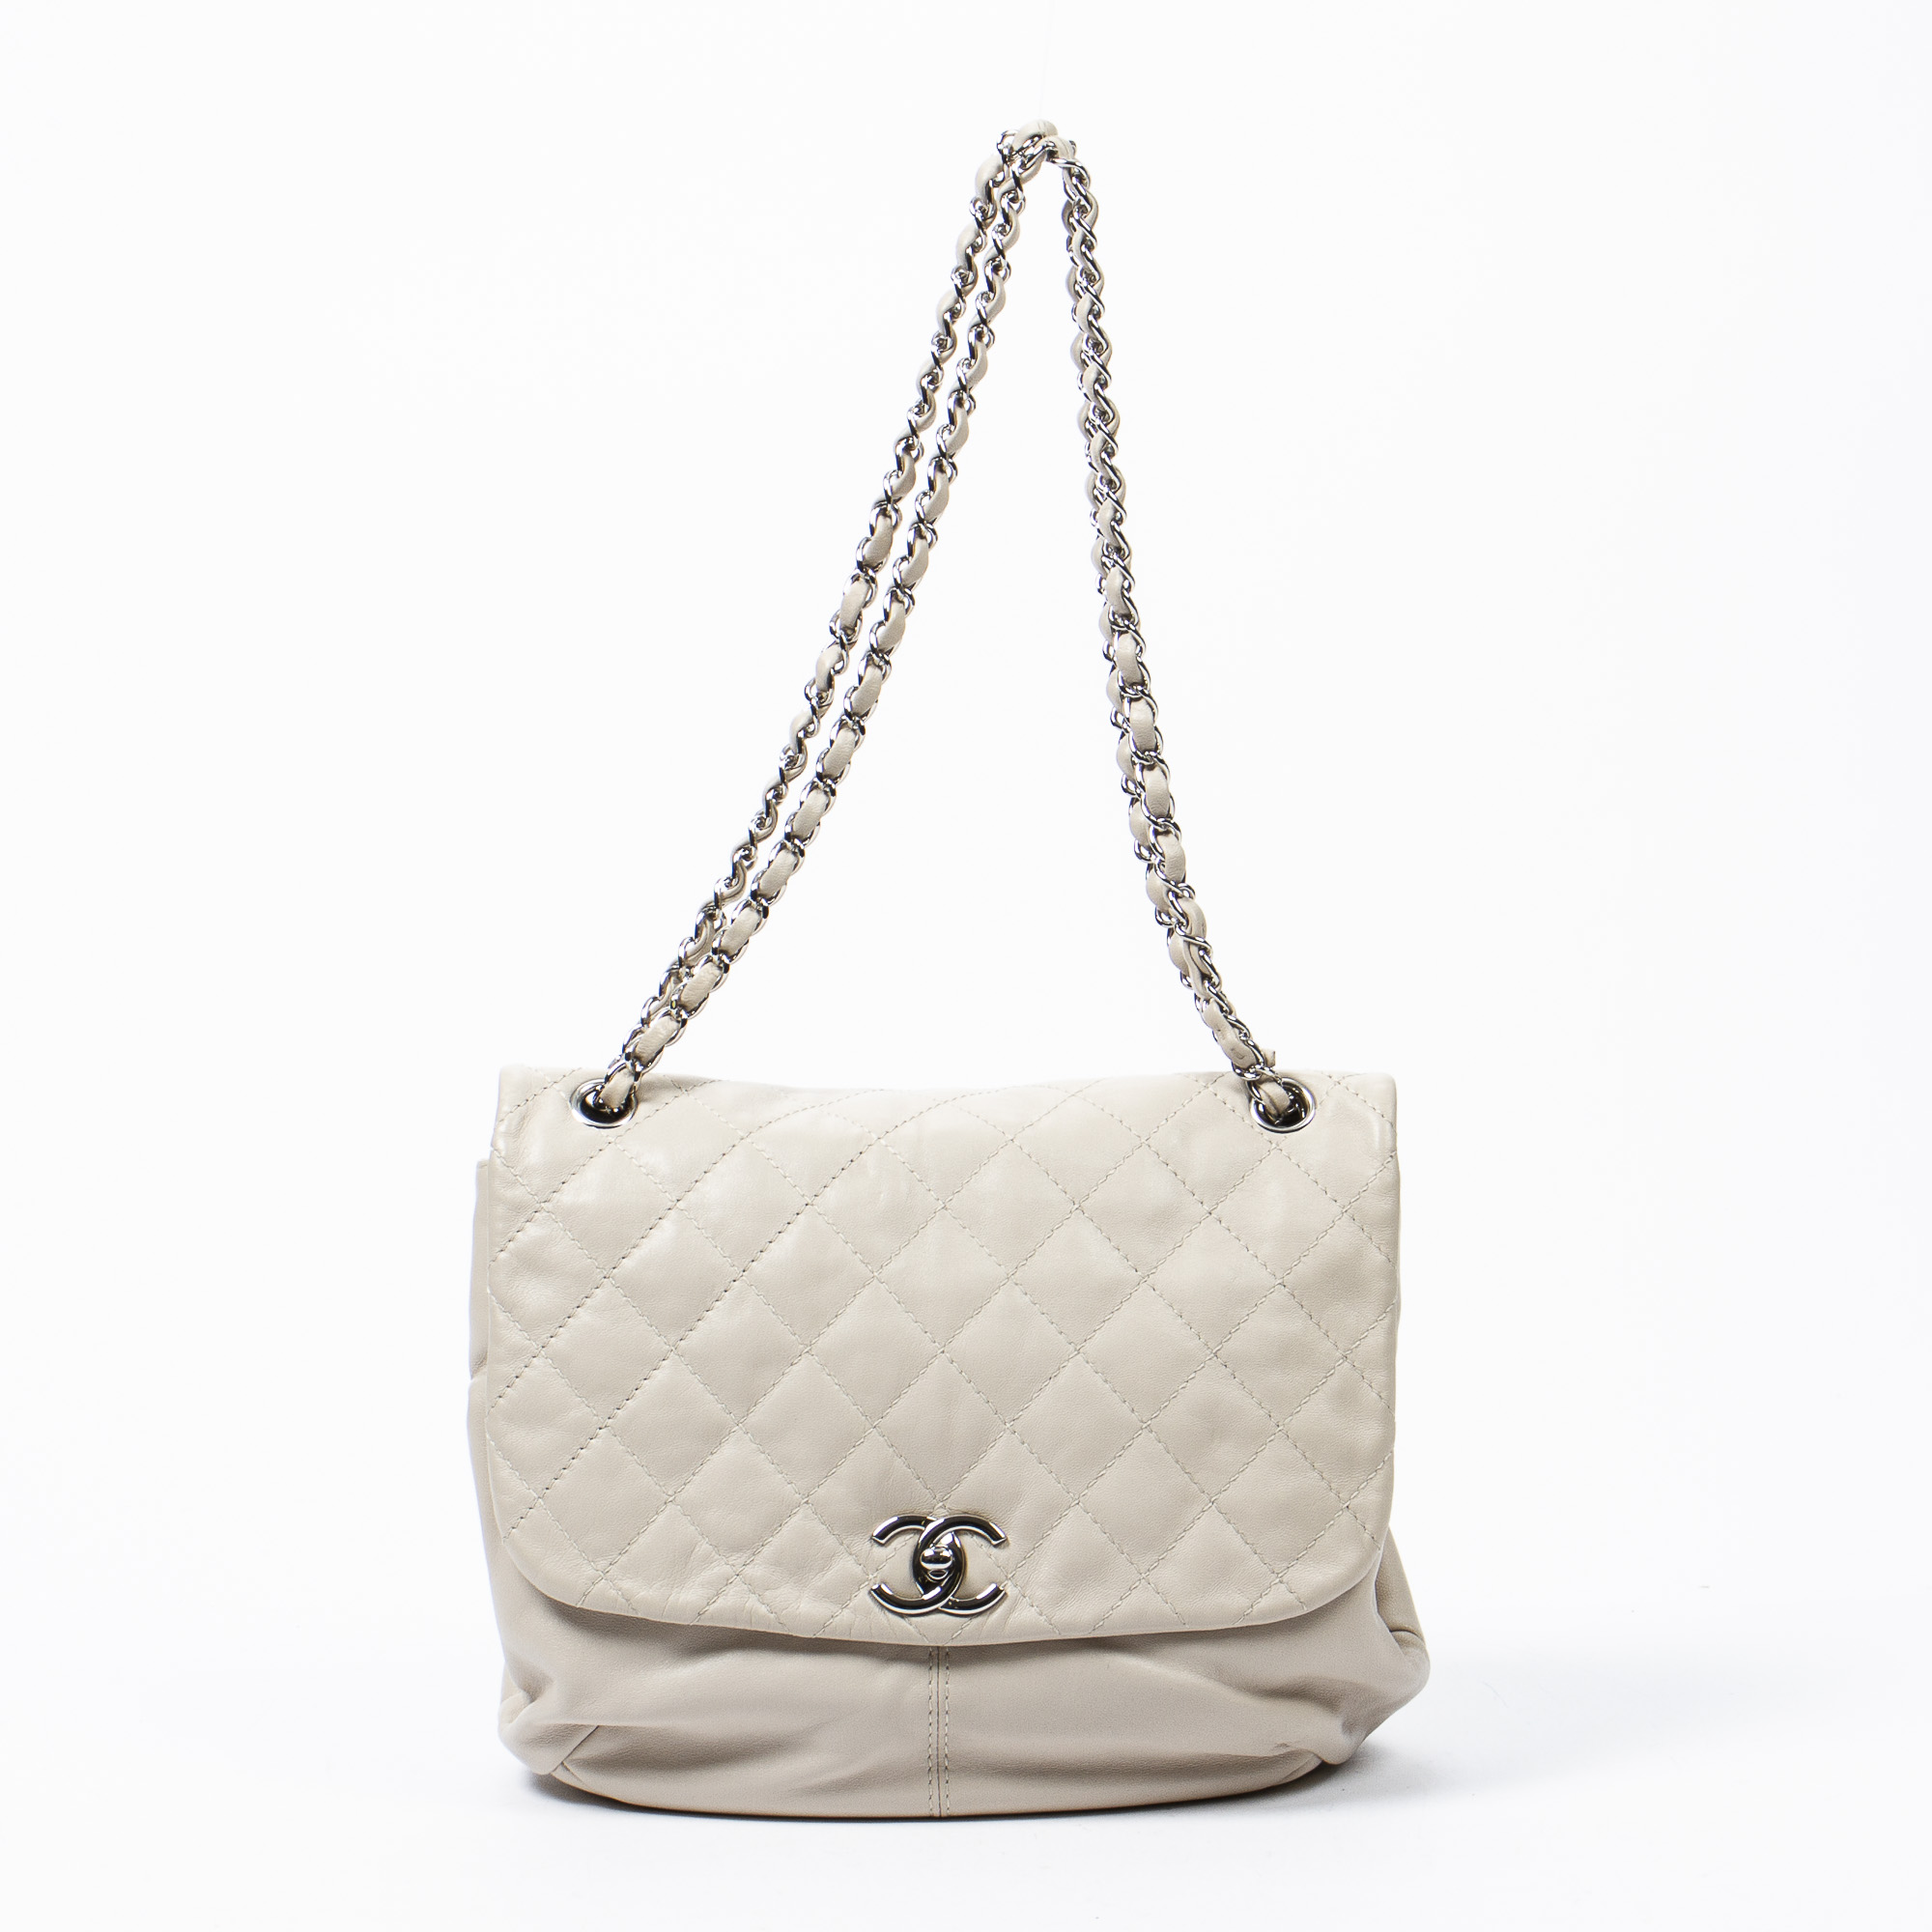 Chanel Ivory Quilted Lambskin Leather Trianon Single Flap Bag